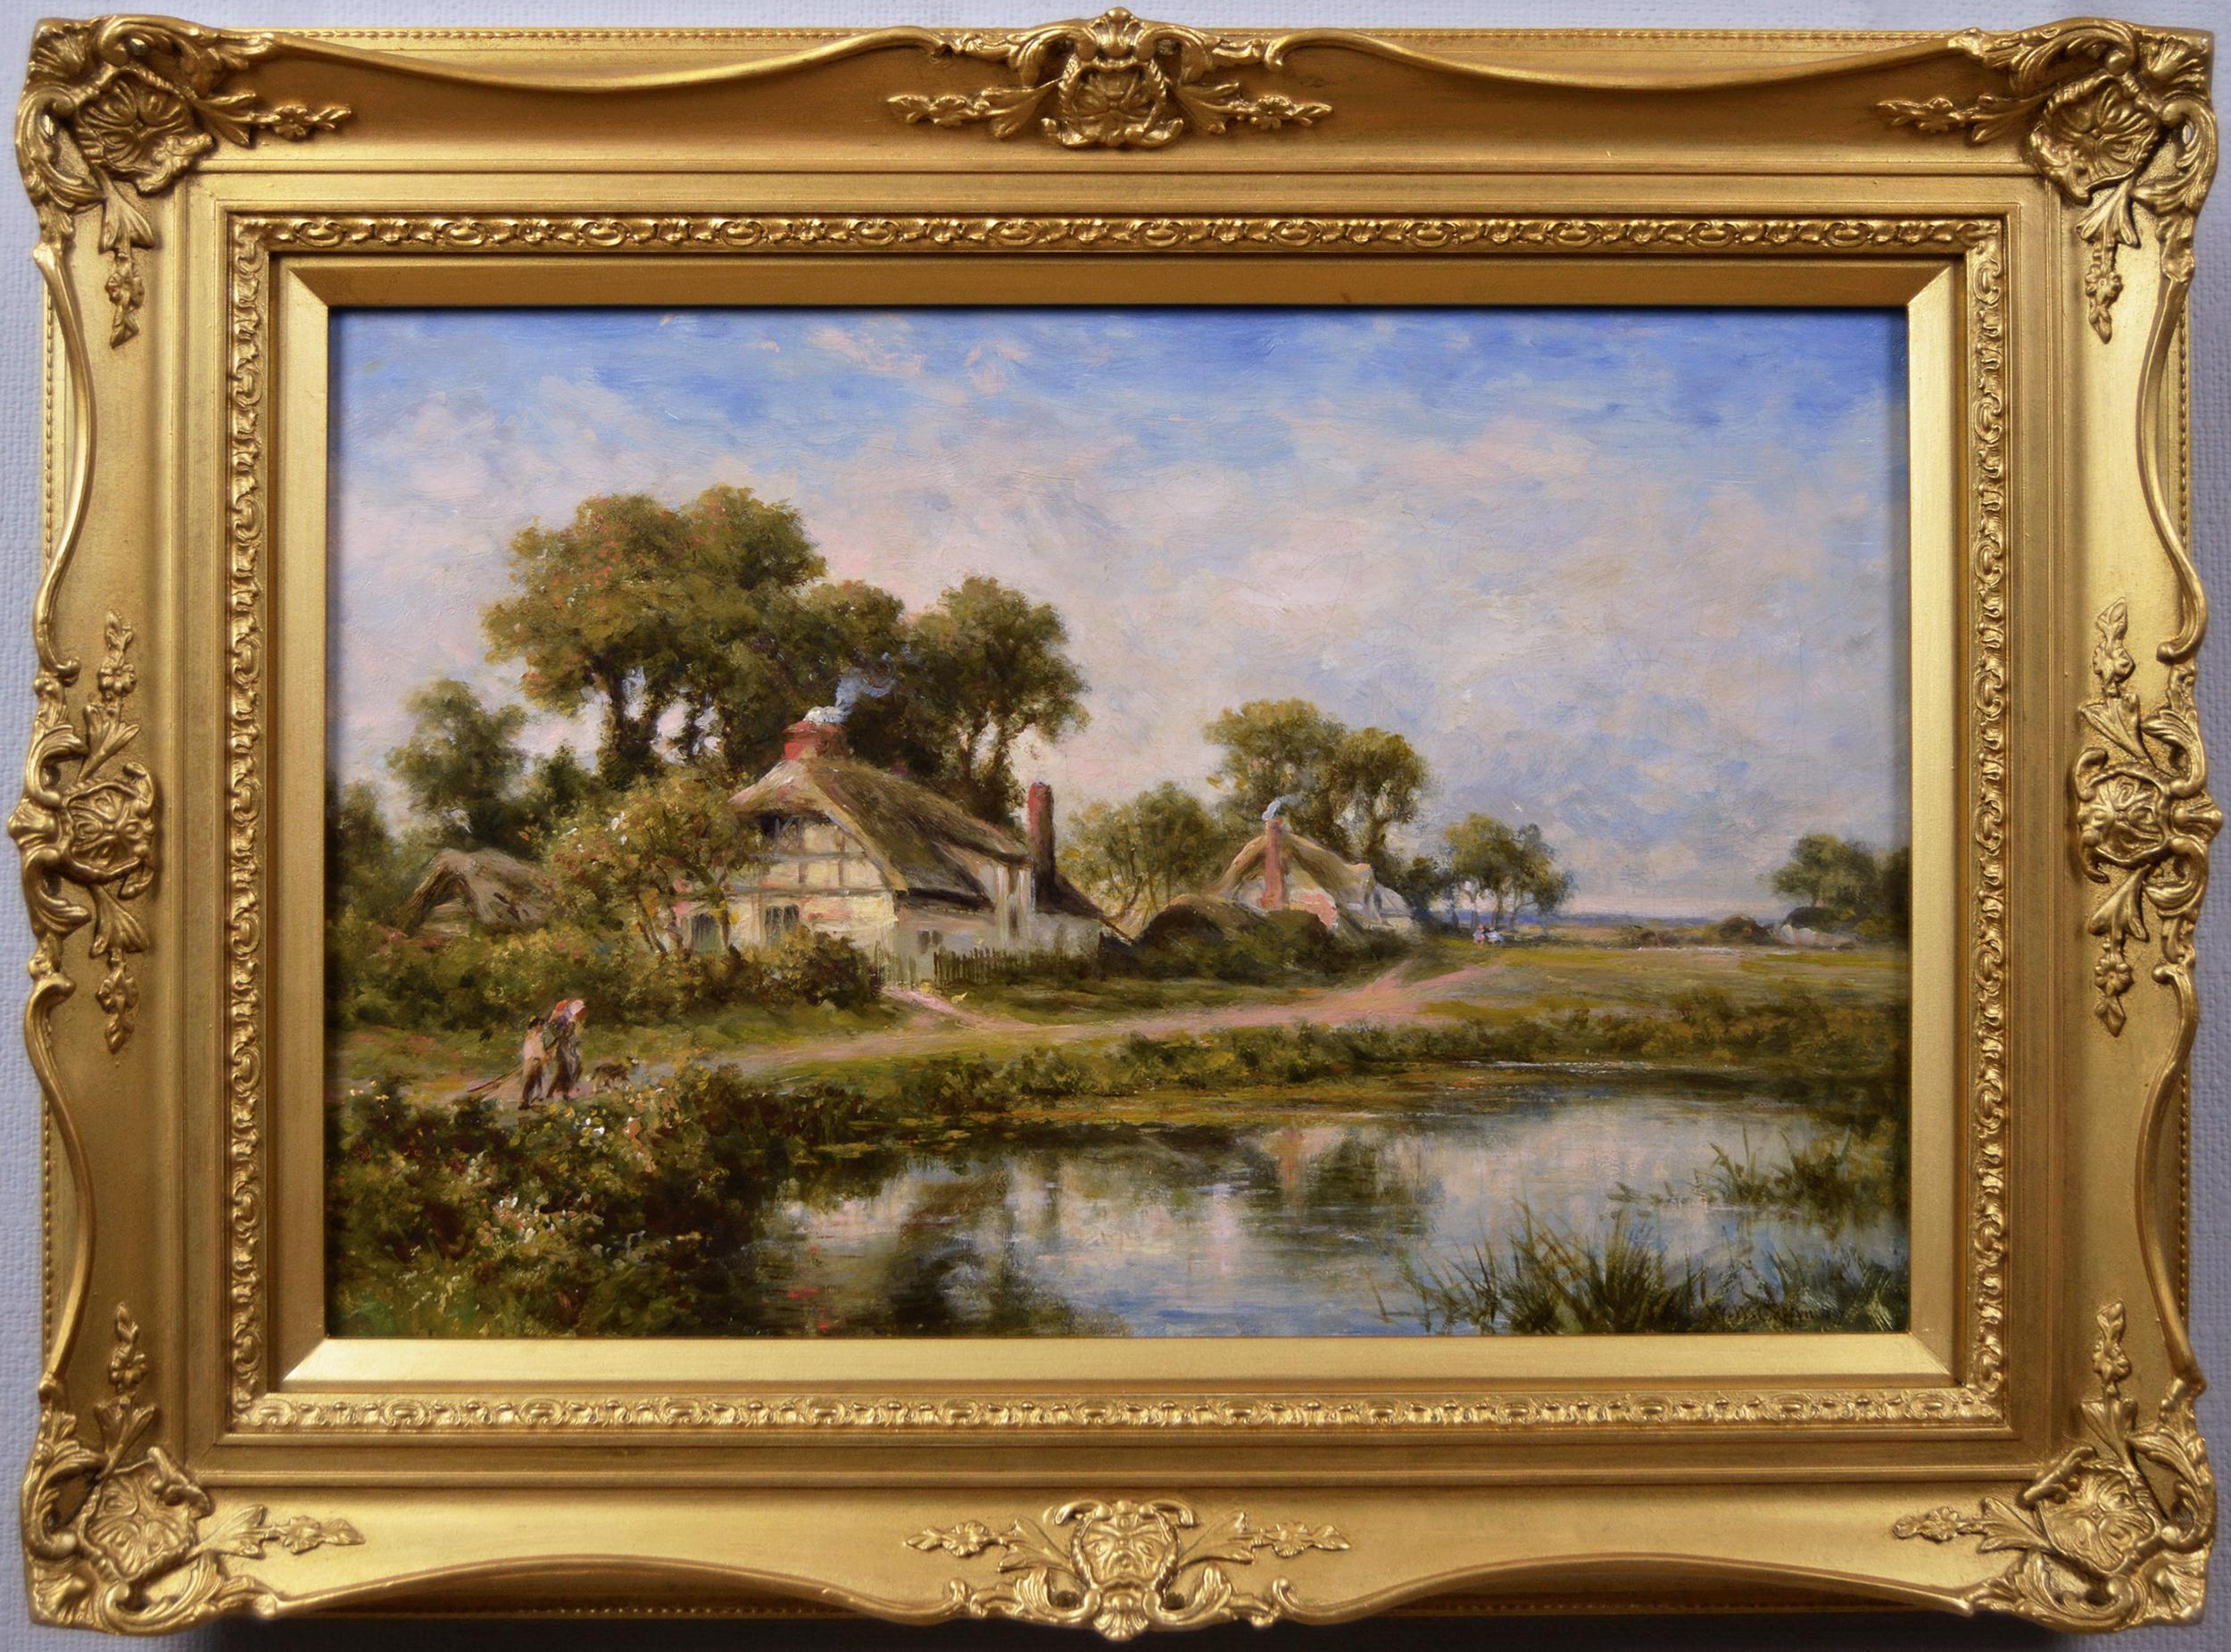 19th Century landscape oil painting of figures near cottages & a pond